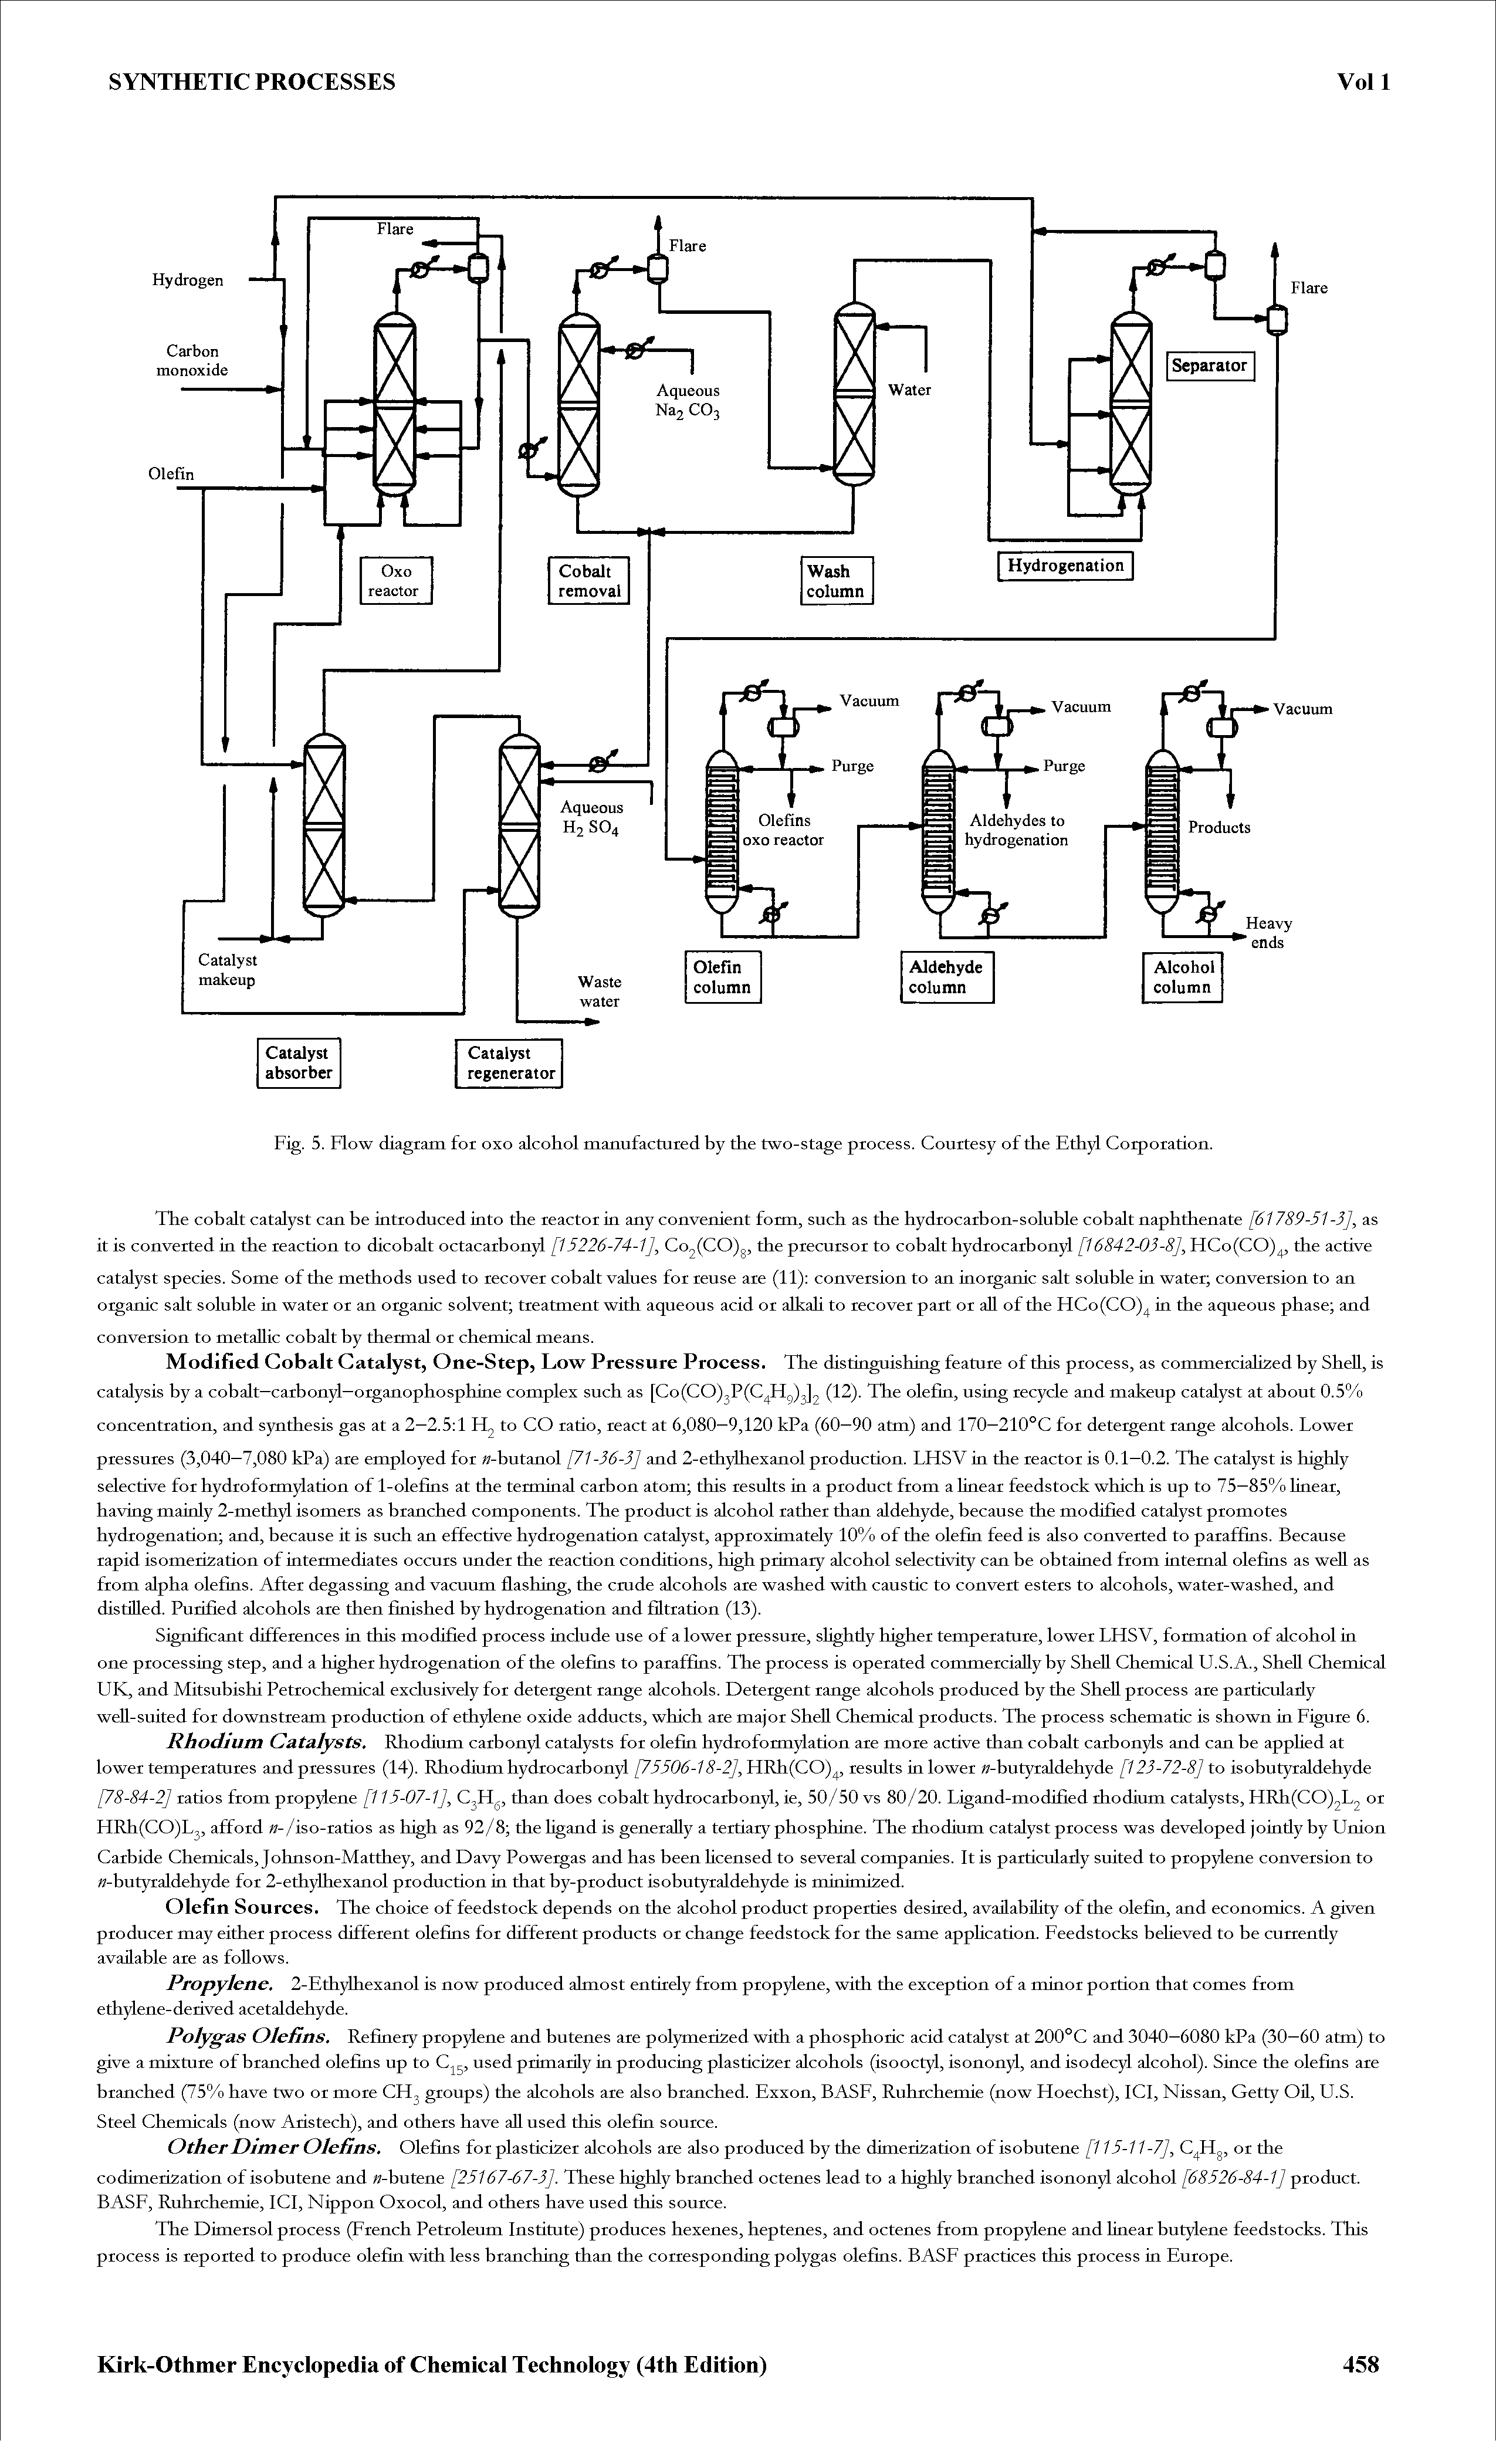 Fig. 5. Flow diagram for oxo alcohol manufactured by the two-stage process. Courtesy of the Ethyl Corporation.